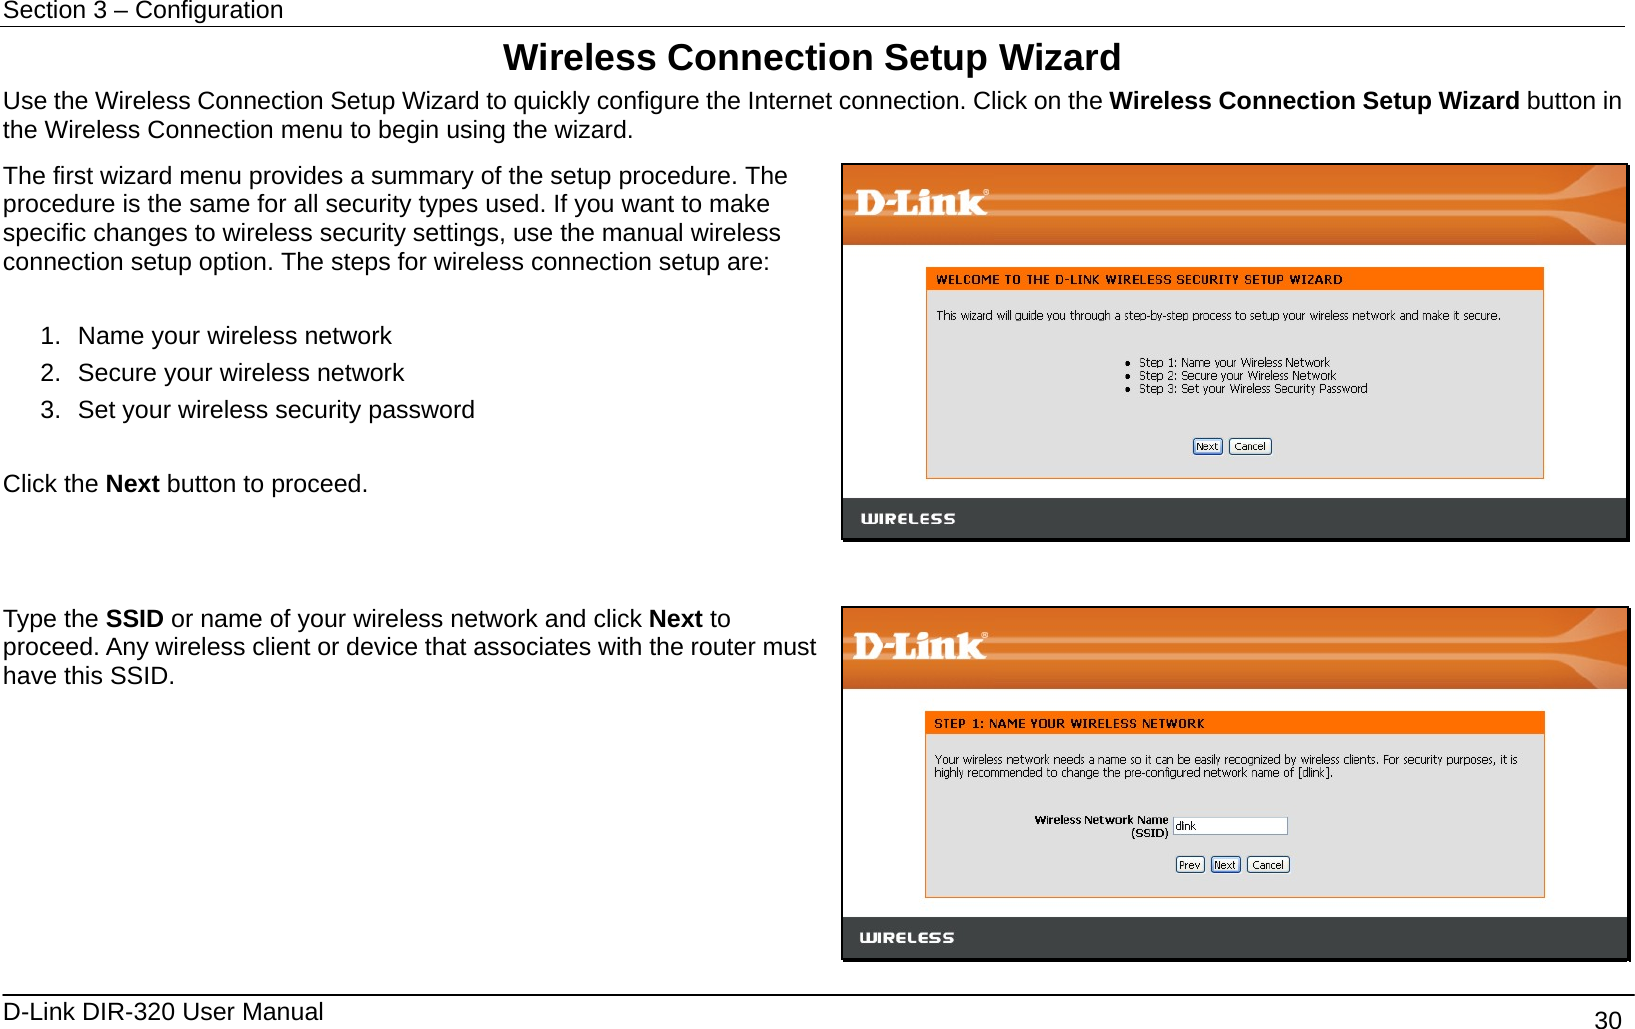 Section 3 – Configuration   D-Link DIR-320 User Manual                                       30 Wireless Connection Setup Wizard Use the Wireless Connection Setup Wizard to quickly configure the Internet connection. Click on the Wireless Connection Setup Wizard button in the Wireless Connection menu to begin using the wizard.   The first wizard menu provides a summary of the setup procedure. The procedure is the same for all security types used. If you want to make specific changes to wireless security settings, use the manual wireless connection setup option. The steps for wireless connection setup are:  1.  Name your wireless network 2.  Secure your wireless network 3.  Set your wireless security password  Click the Next button to proceed.    Type the SSID or name of your wireless network and click Next to proceed. Any wireless client or device that associates with the router must have this SSID.    